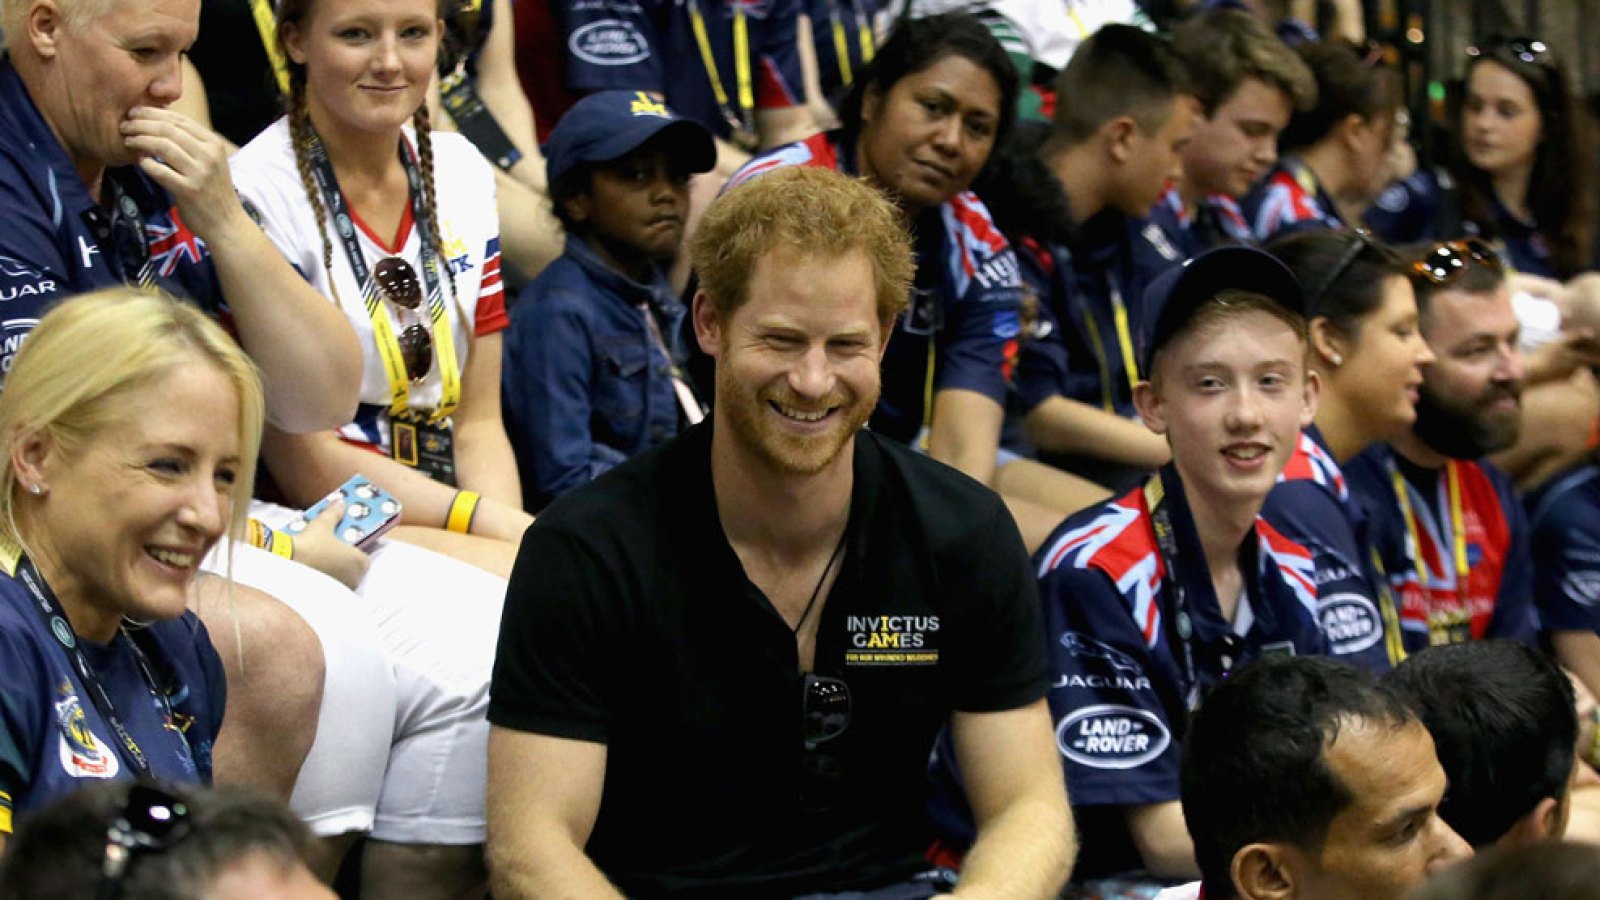 Prince Harry sits in the crowd watching sitting volleyball in Orlando, Florida